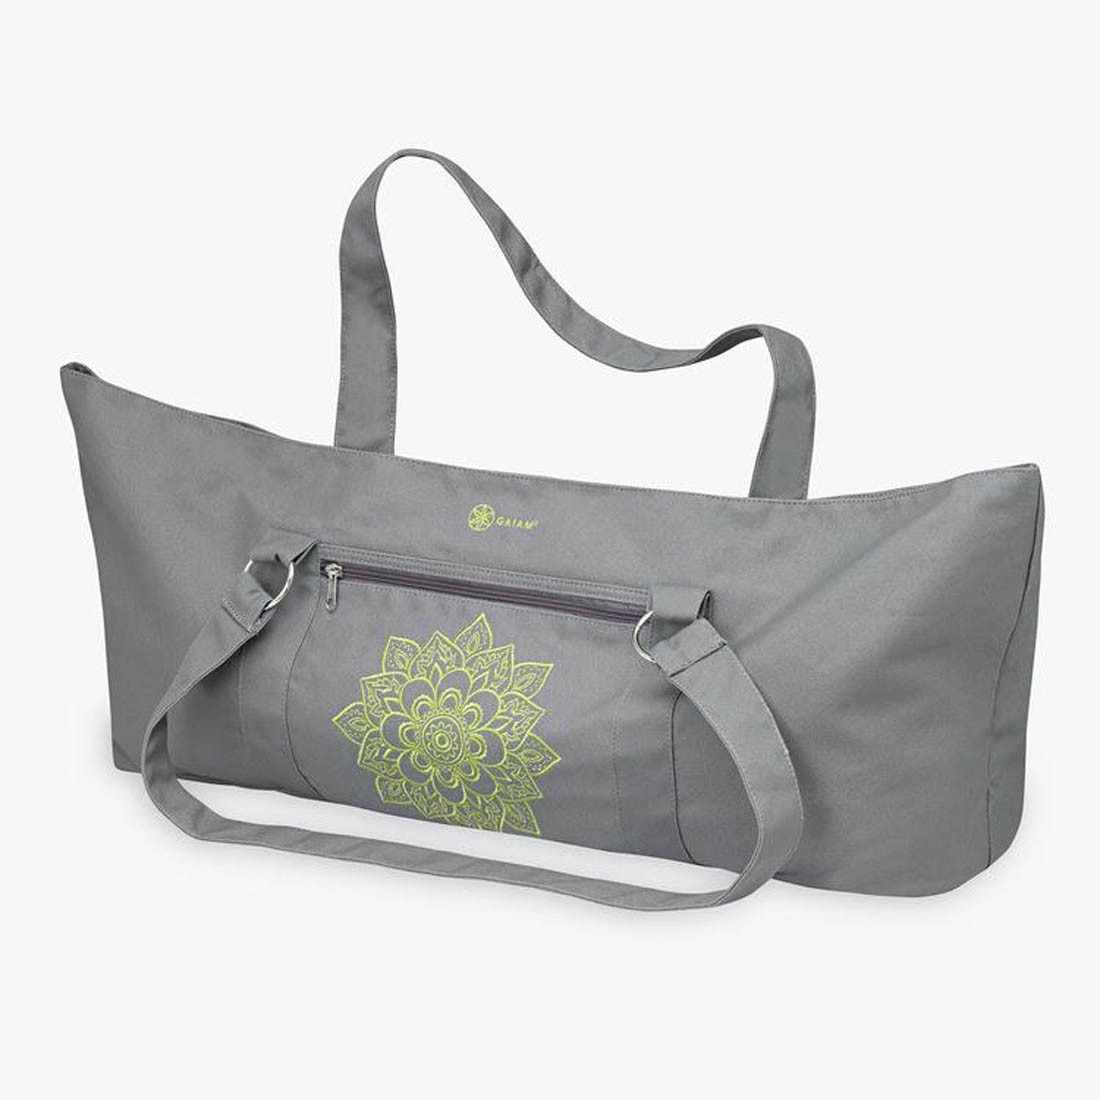 Buy GAIAM Citron Sundial Yoga Tote Bag - GAIAM, delivered to your home